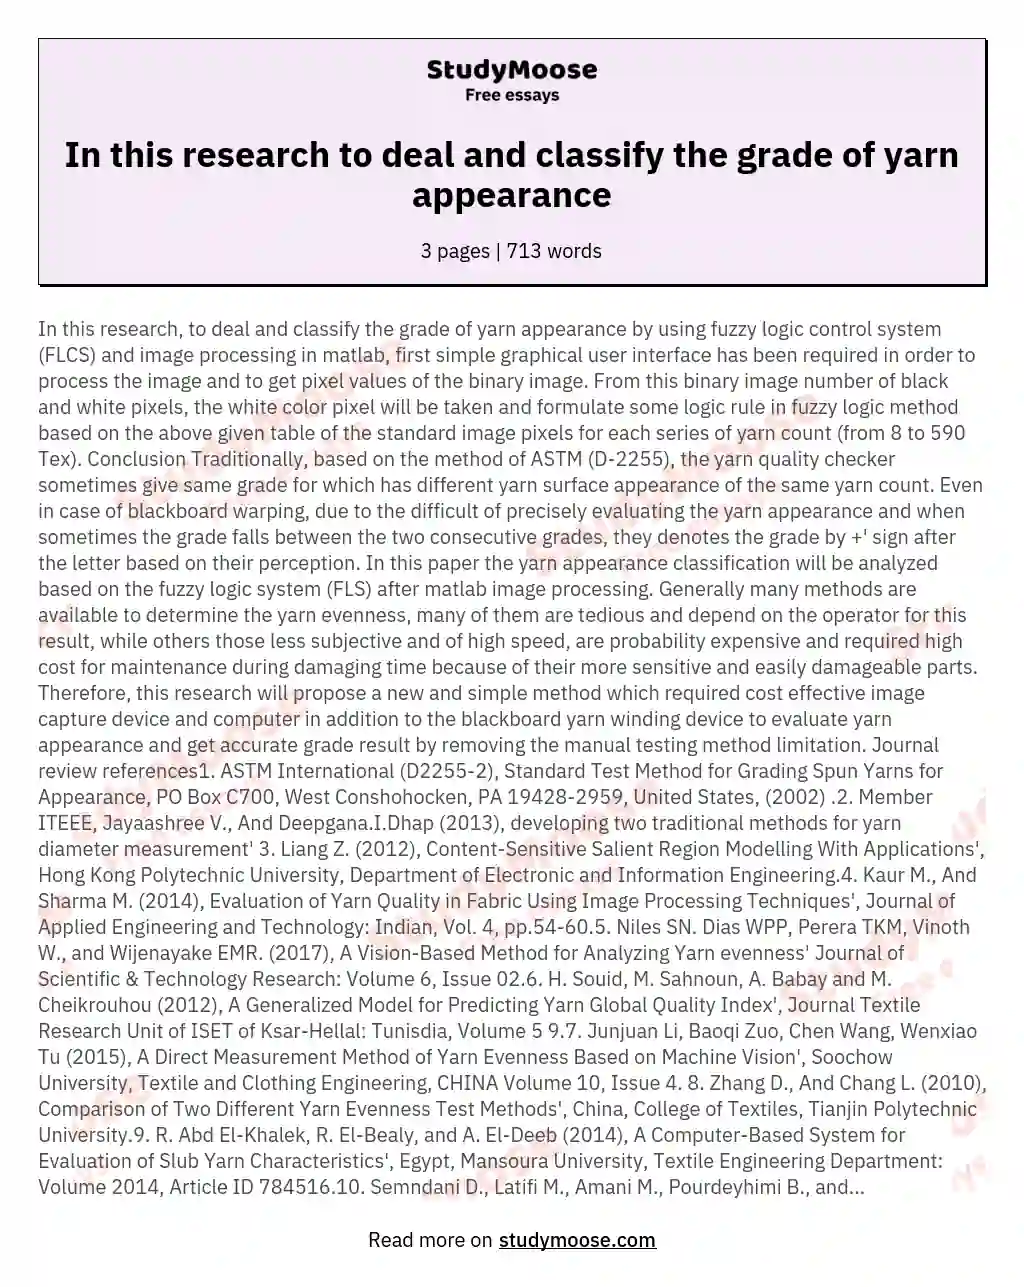 In this research to deal and classify the grade of yarn appearance